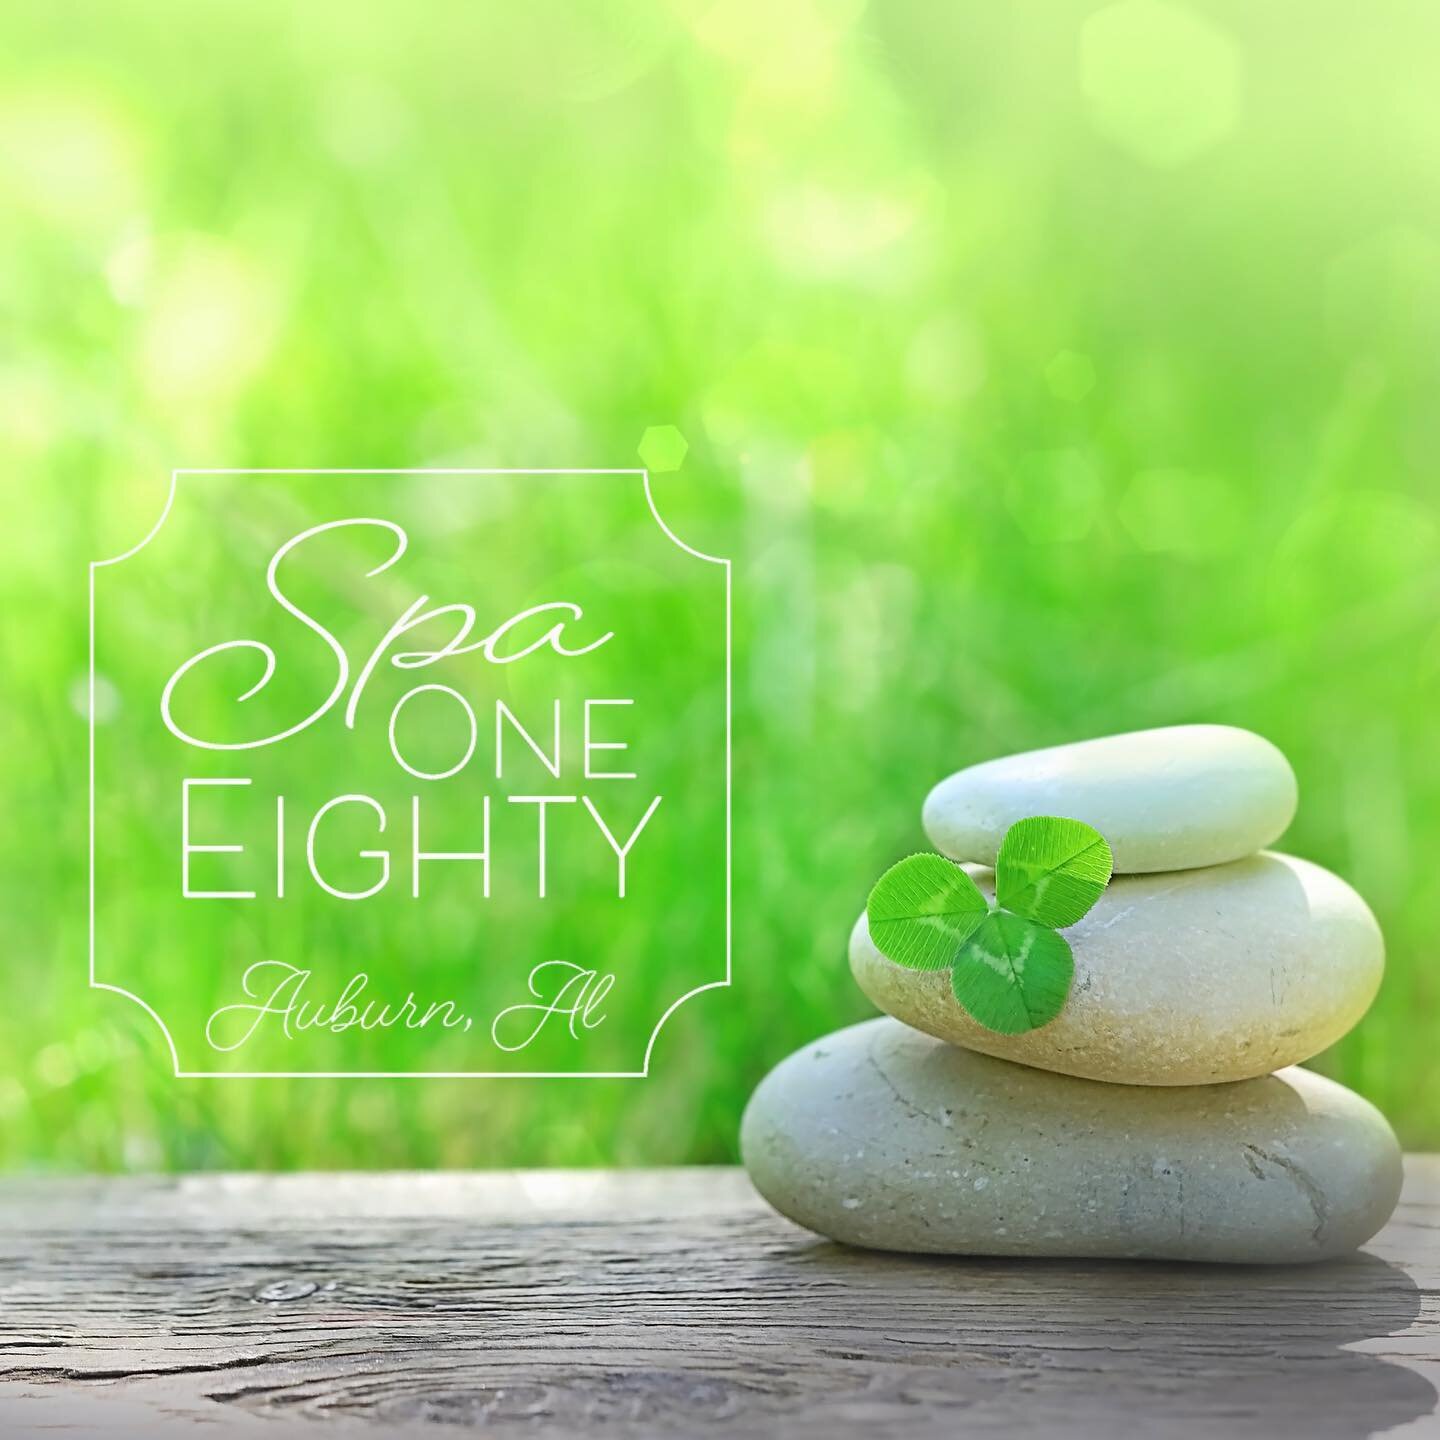 ☘️ Wishing you a pot o&rsquo; gold,
And all the joy your heart can hold. Happy St.Patrick&rsquo;s Day from Spa 180! ☘️🌈💰 #StPatricksDay #Spa180 #Auburn #VotedBestSpa #AuburnSpa #MassageTherapy #Skincare #Waxing #Nails #Makeup #PermanentCosmetics #L